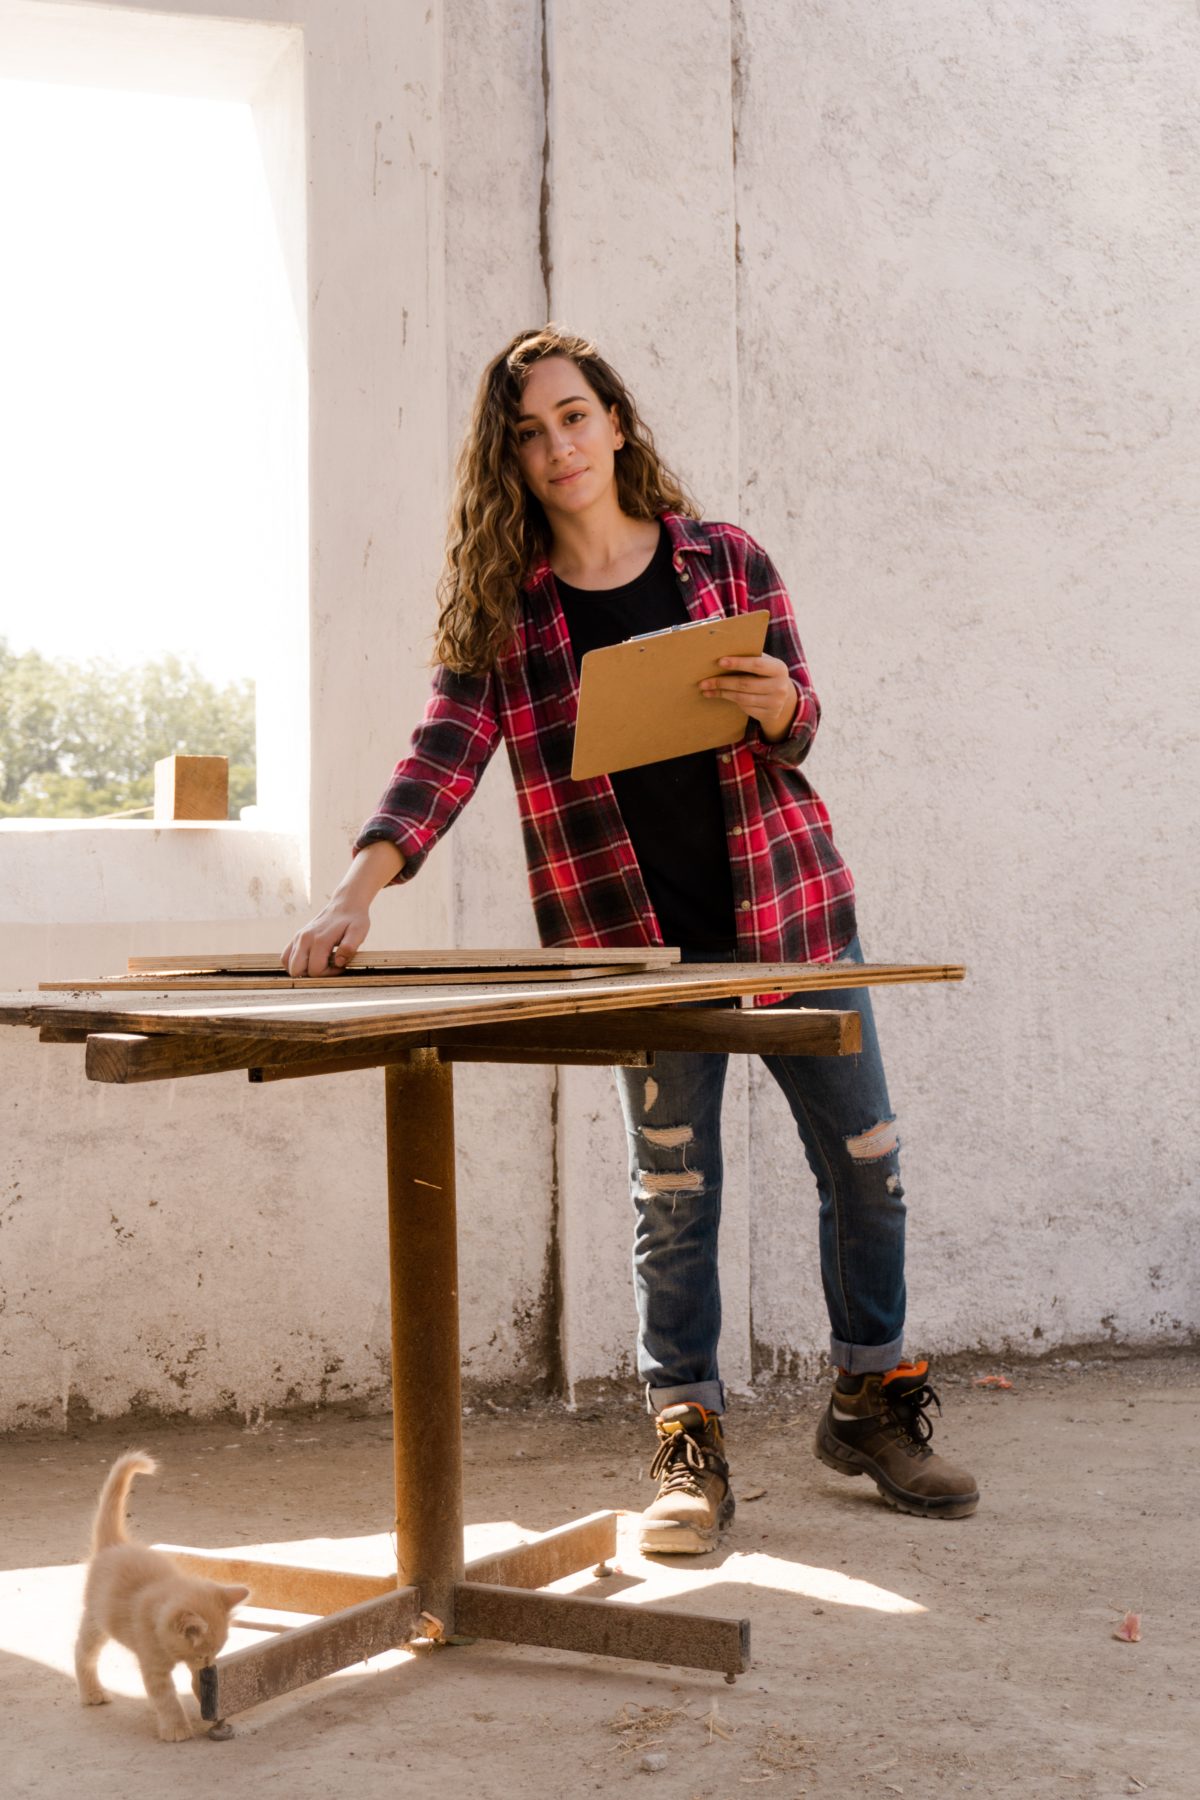 Young woman standing over table on a construction project holding documentation